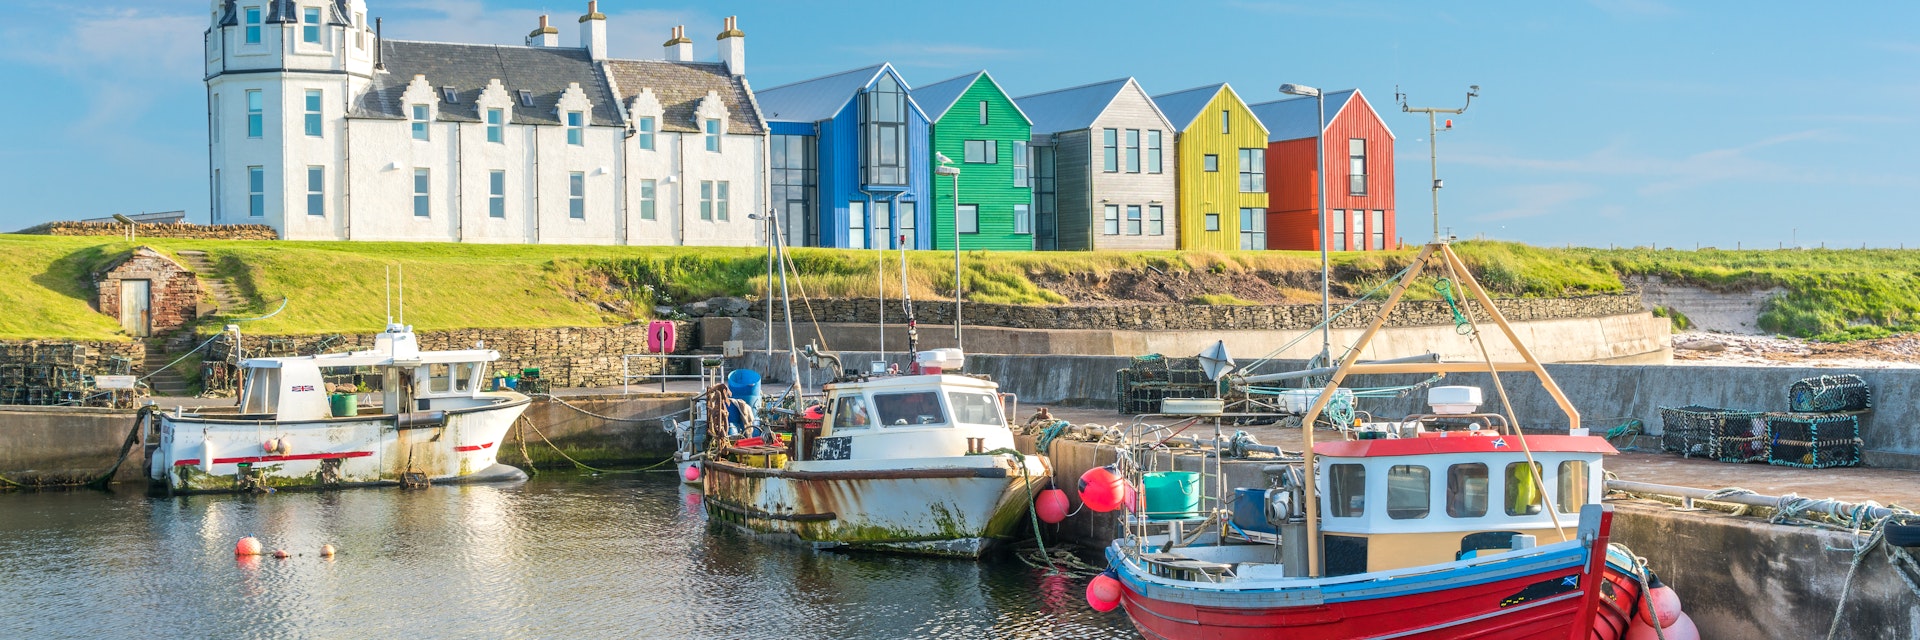 The colorful buildings of John O'Groats in a sunny afternoon, Caithness county, Scotland.